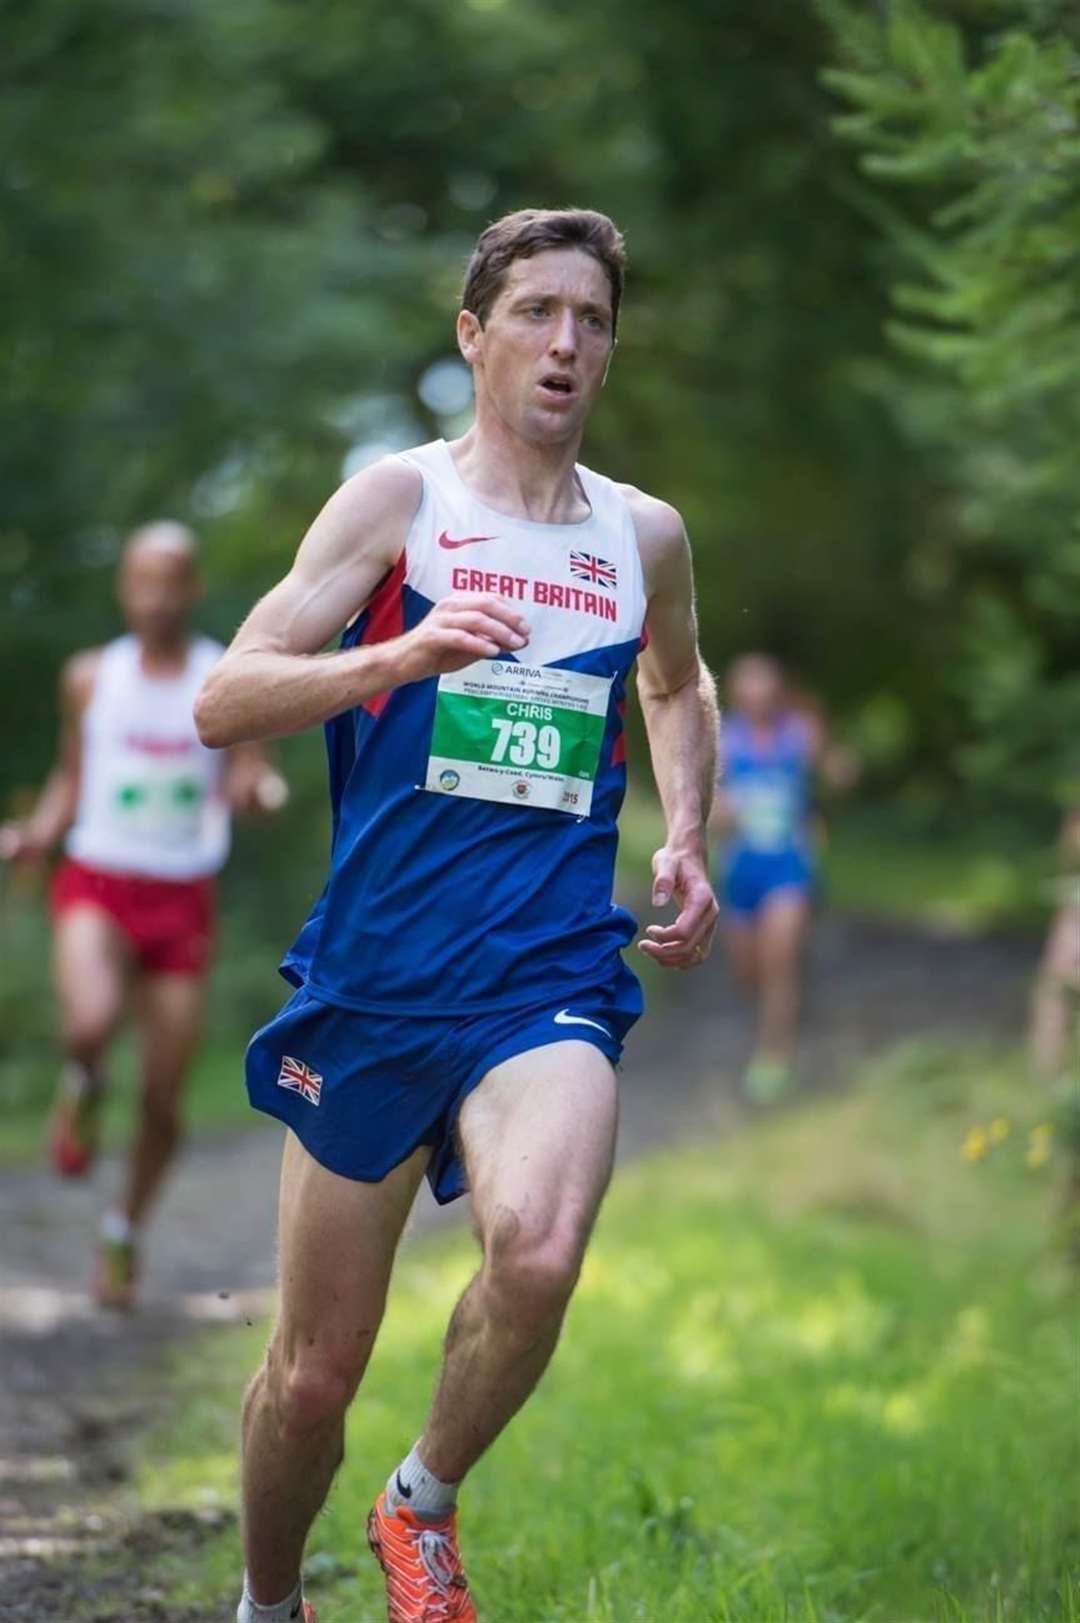 Chris Smith represented Great Britain in many international mountain running events.